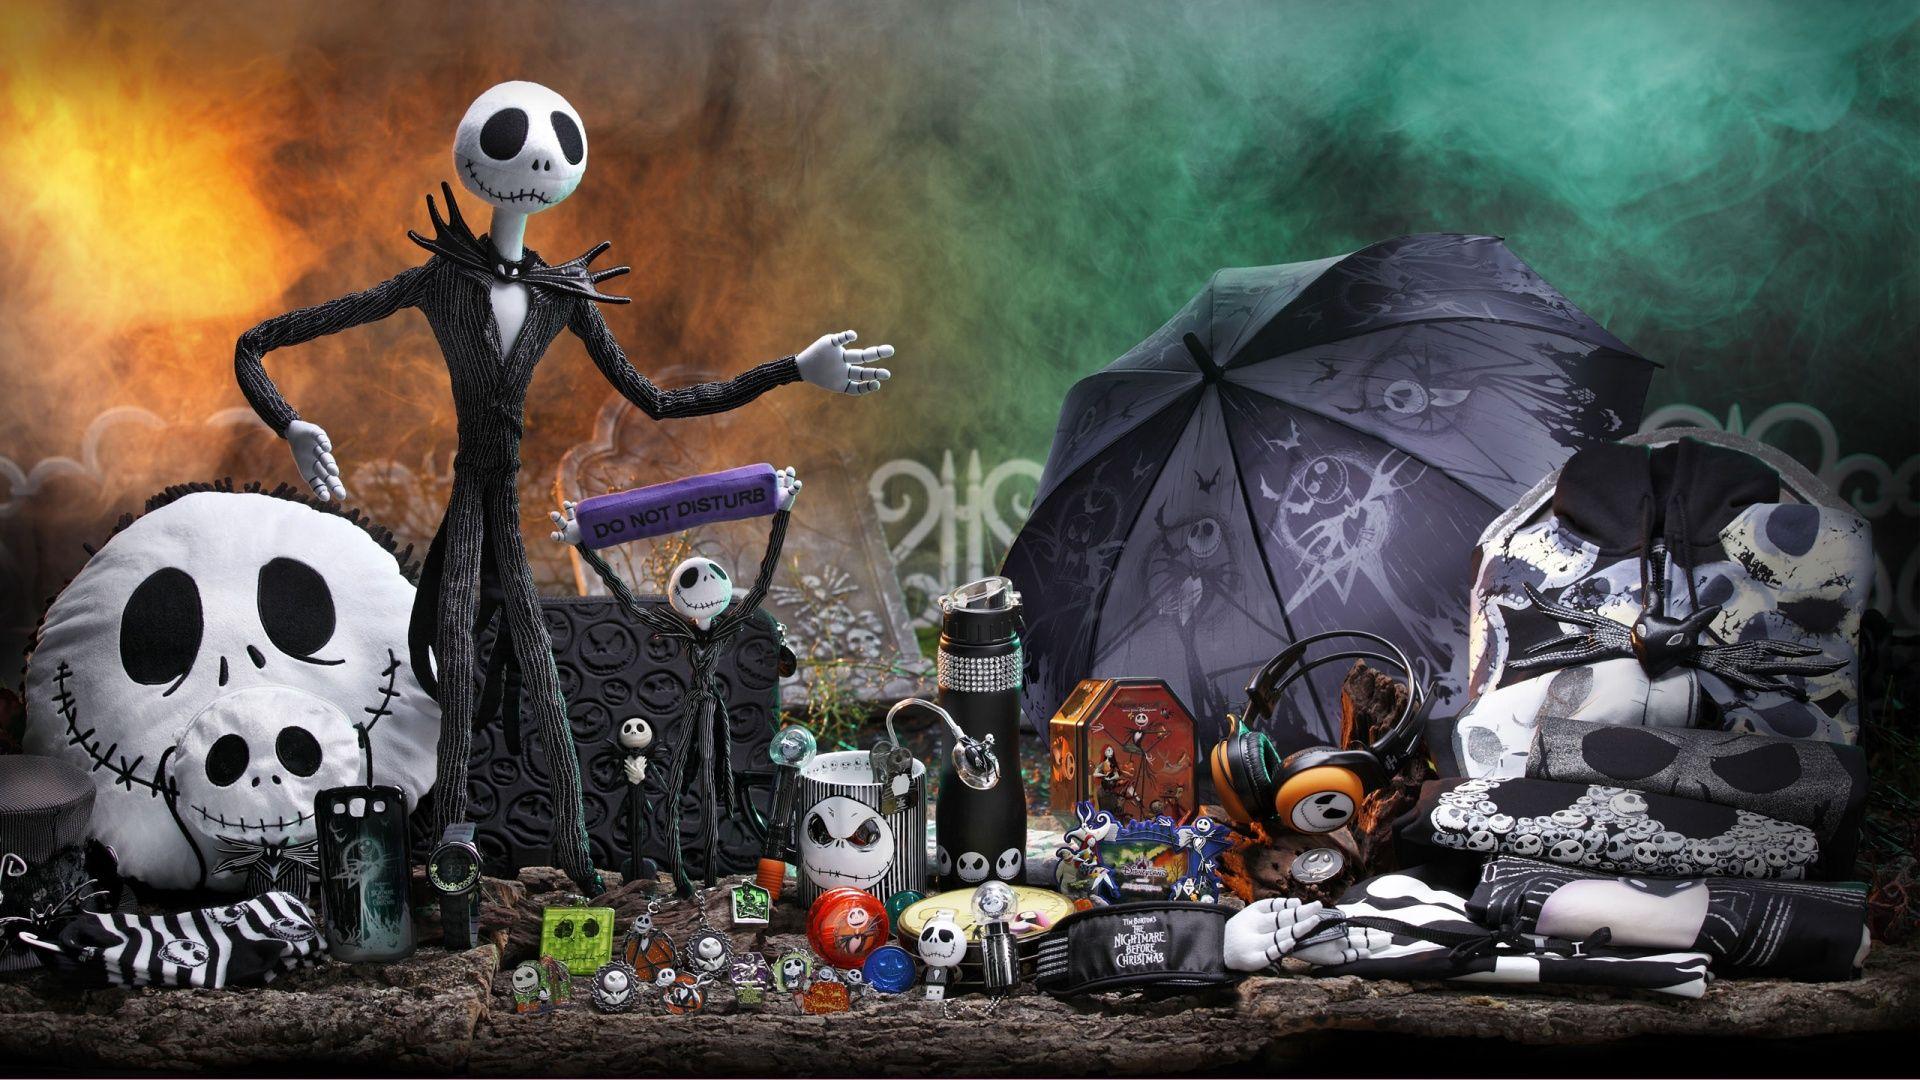 The Nightmare Before Christmas Wallpaper HD Wallpaper. What's this